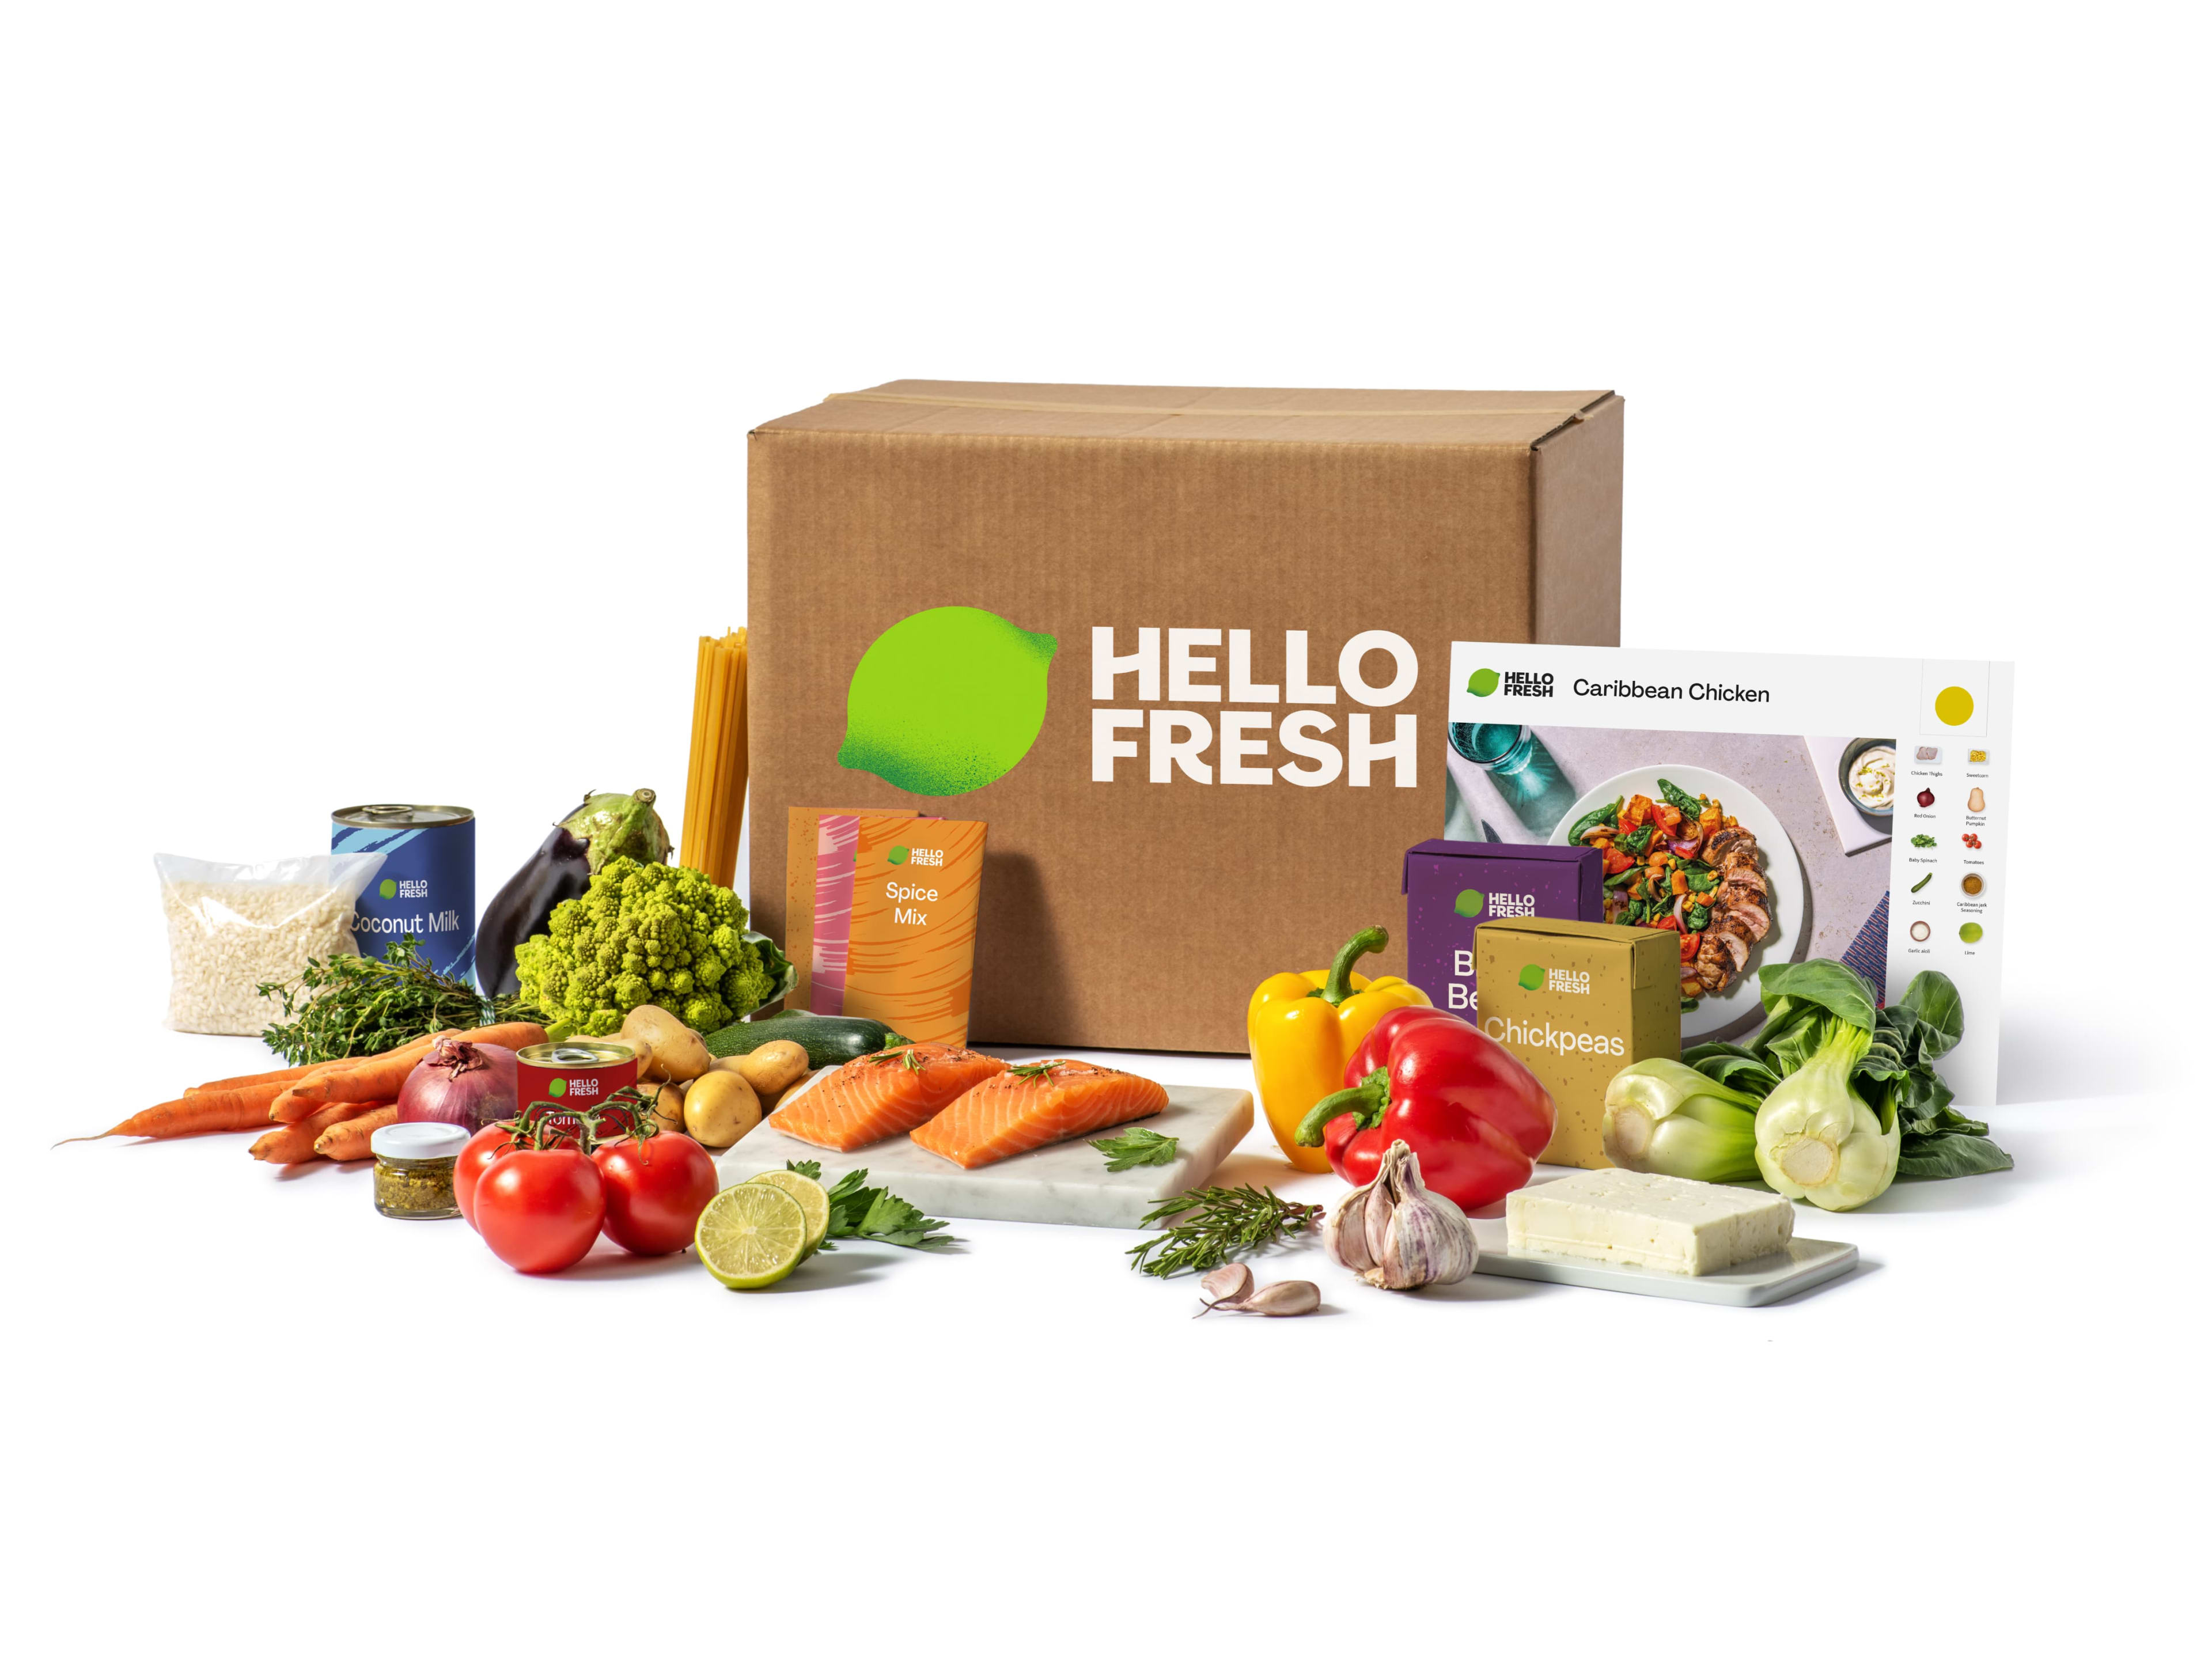 A gourmet meal kit subscription with you in mind